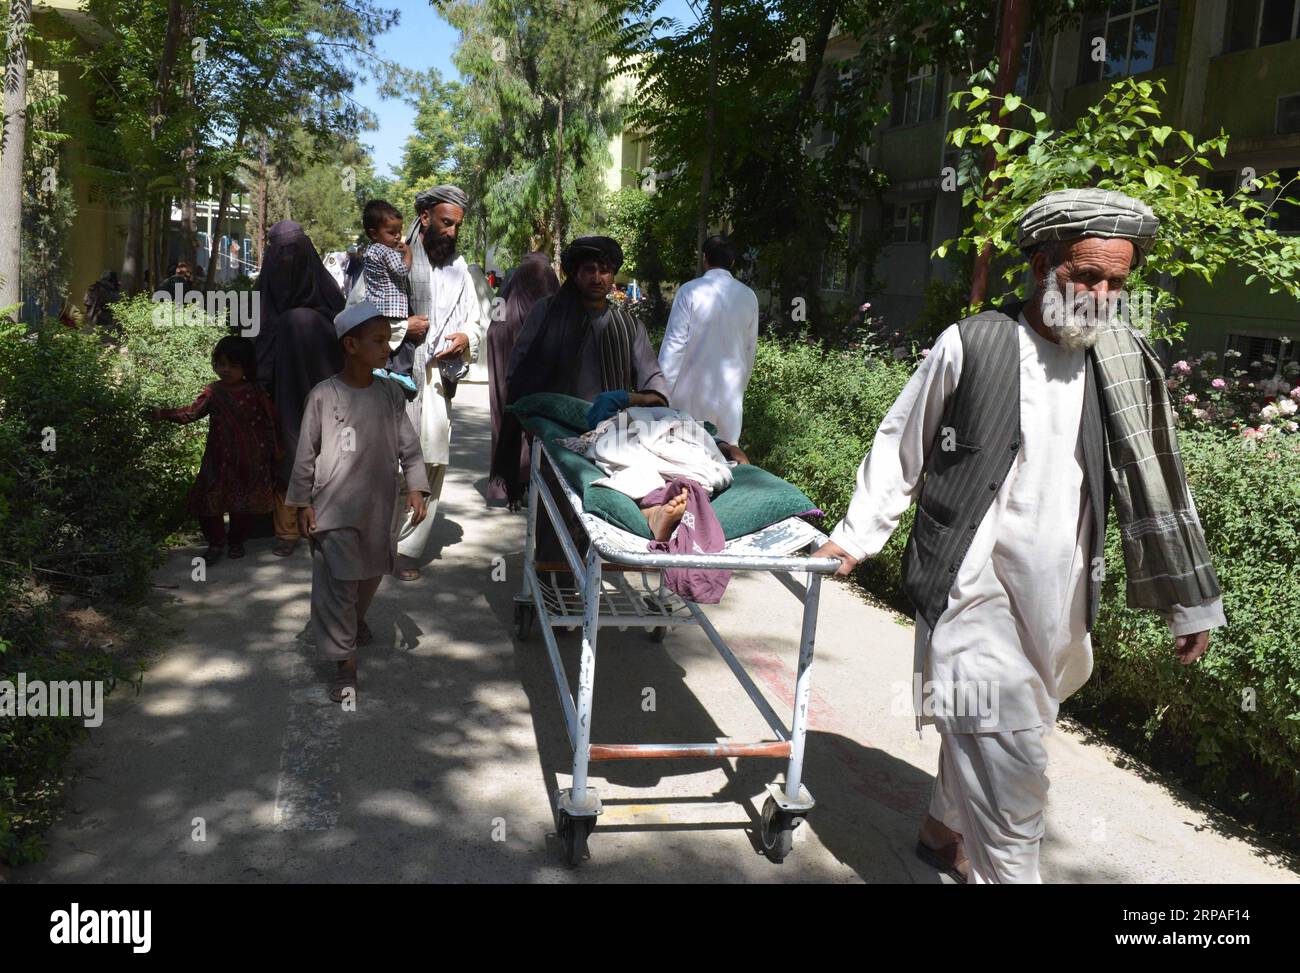 (190507) -- KANDAHAR, May 7, 2019 -- People carry a man for medical treatment at the Mirwais Regional Hospital in Kandahar, Afghanistan, May 4, 2019. The Mirwais Regional Hospital, locally known as the Chinese Hospital , was built by China in 1974 and put into operation in 1979 on 44 acres of land in Kandahar, the largest city in the southern region as a gift to the Afghan people. The hospital is the largest health center in Afghanistan s southern region and provides almost all kinds of services to patients ranging from diagnosis of diseases to surgery of war victims, childcare and maternity. Stock Photo